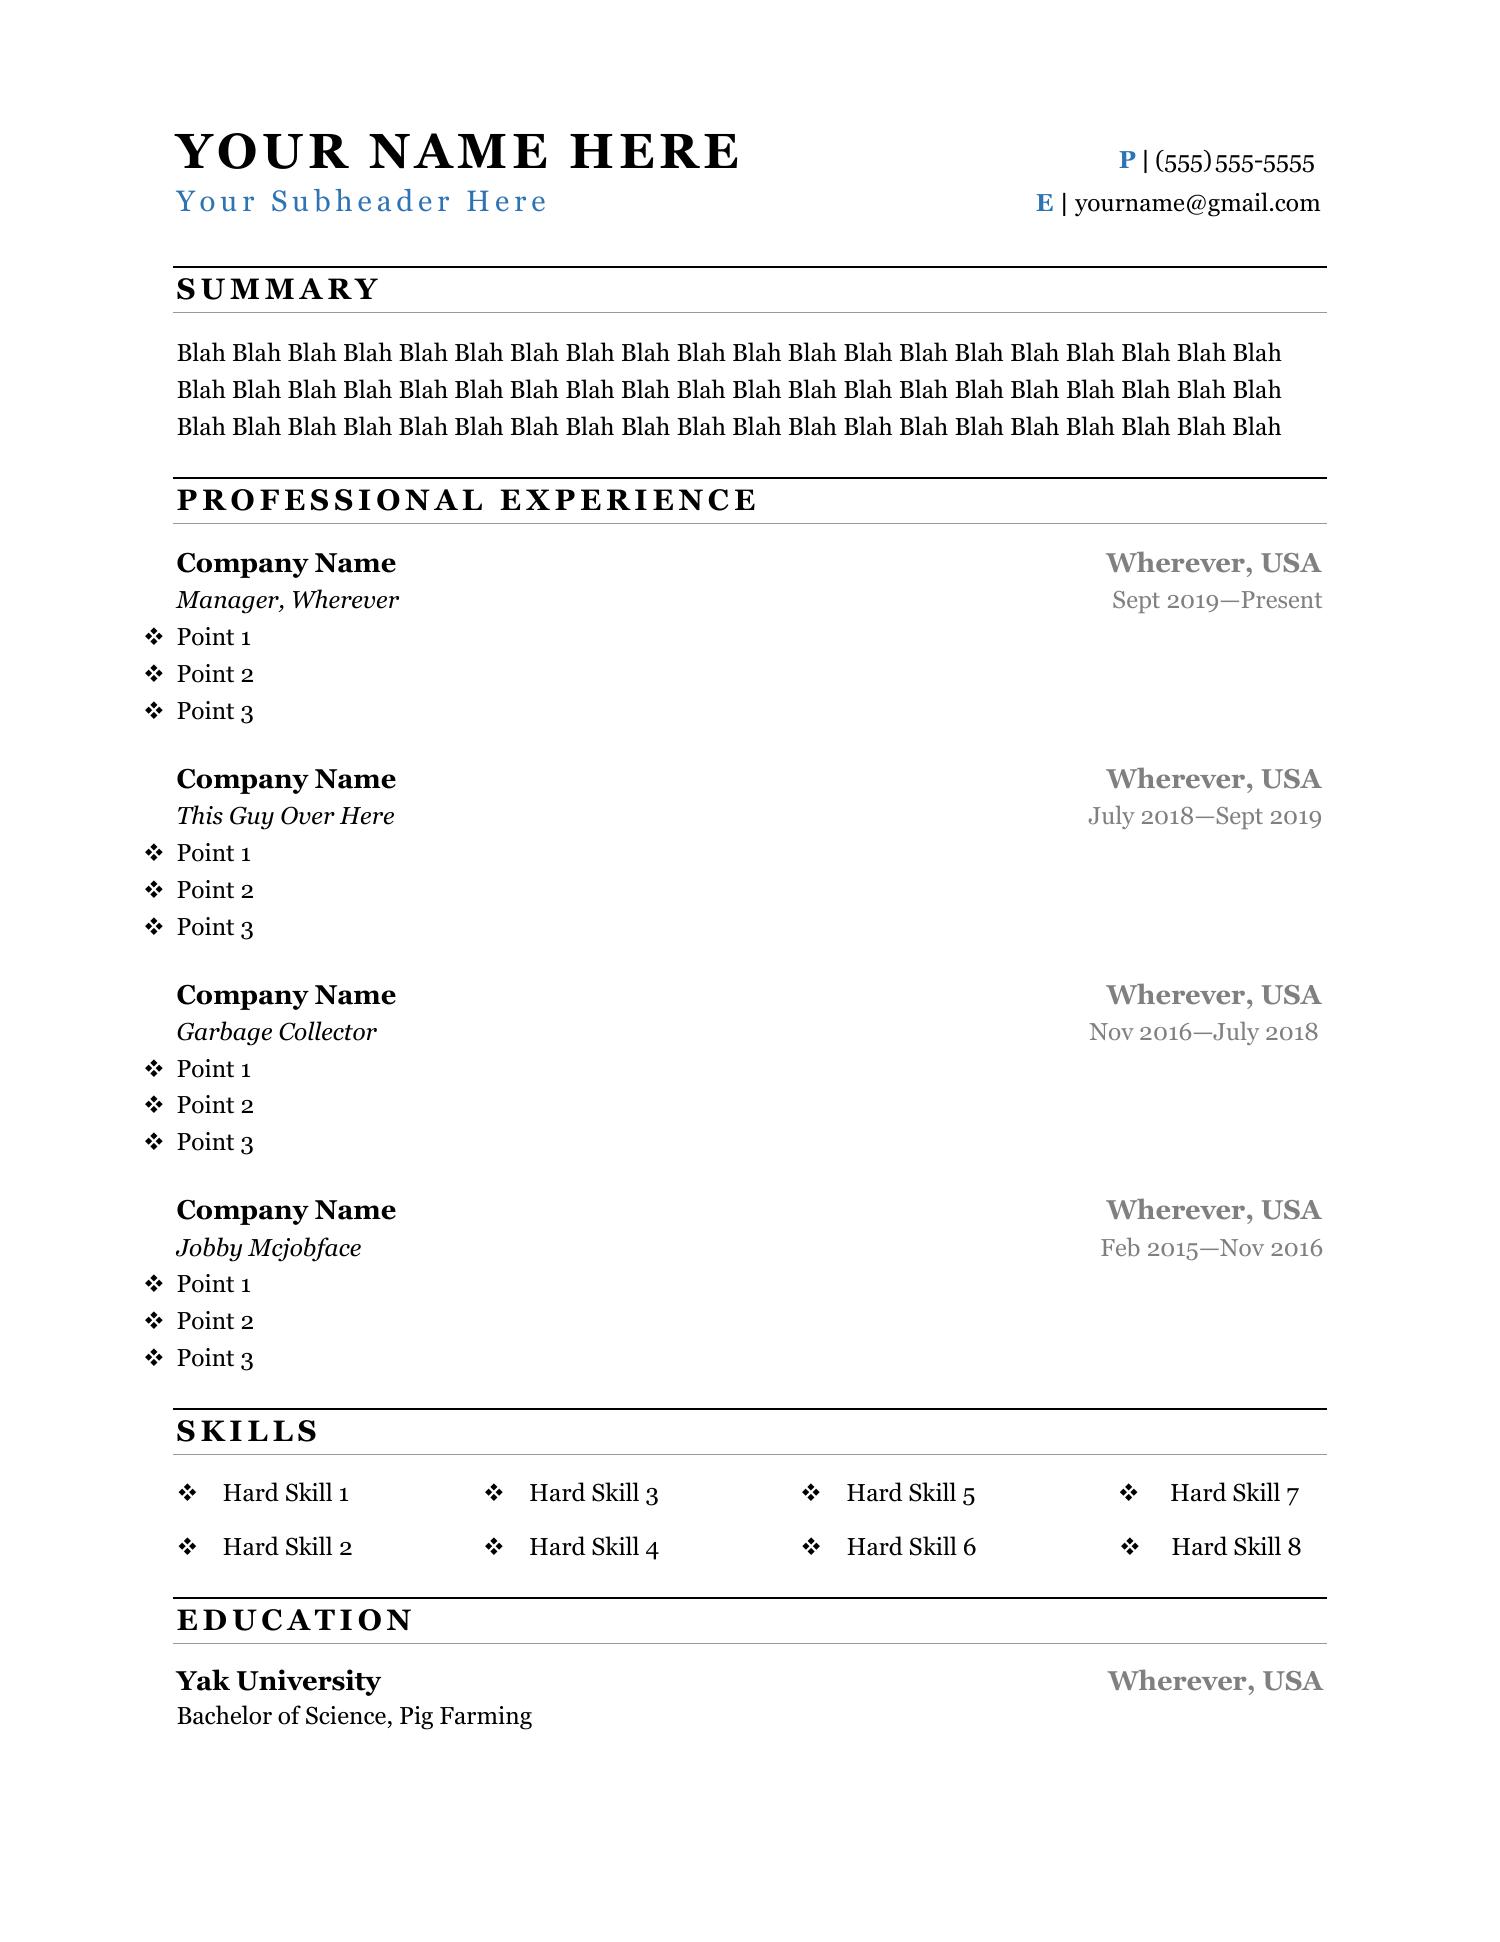 Resume Template.docx  DocDroid